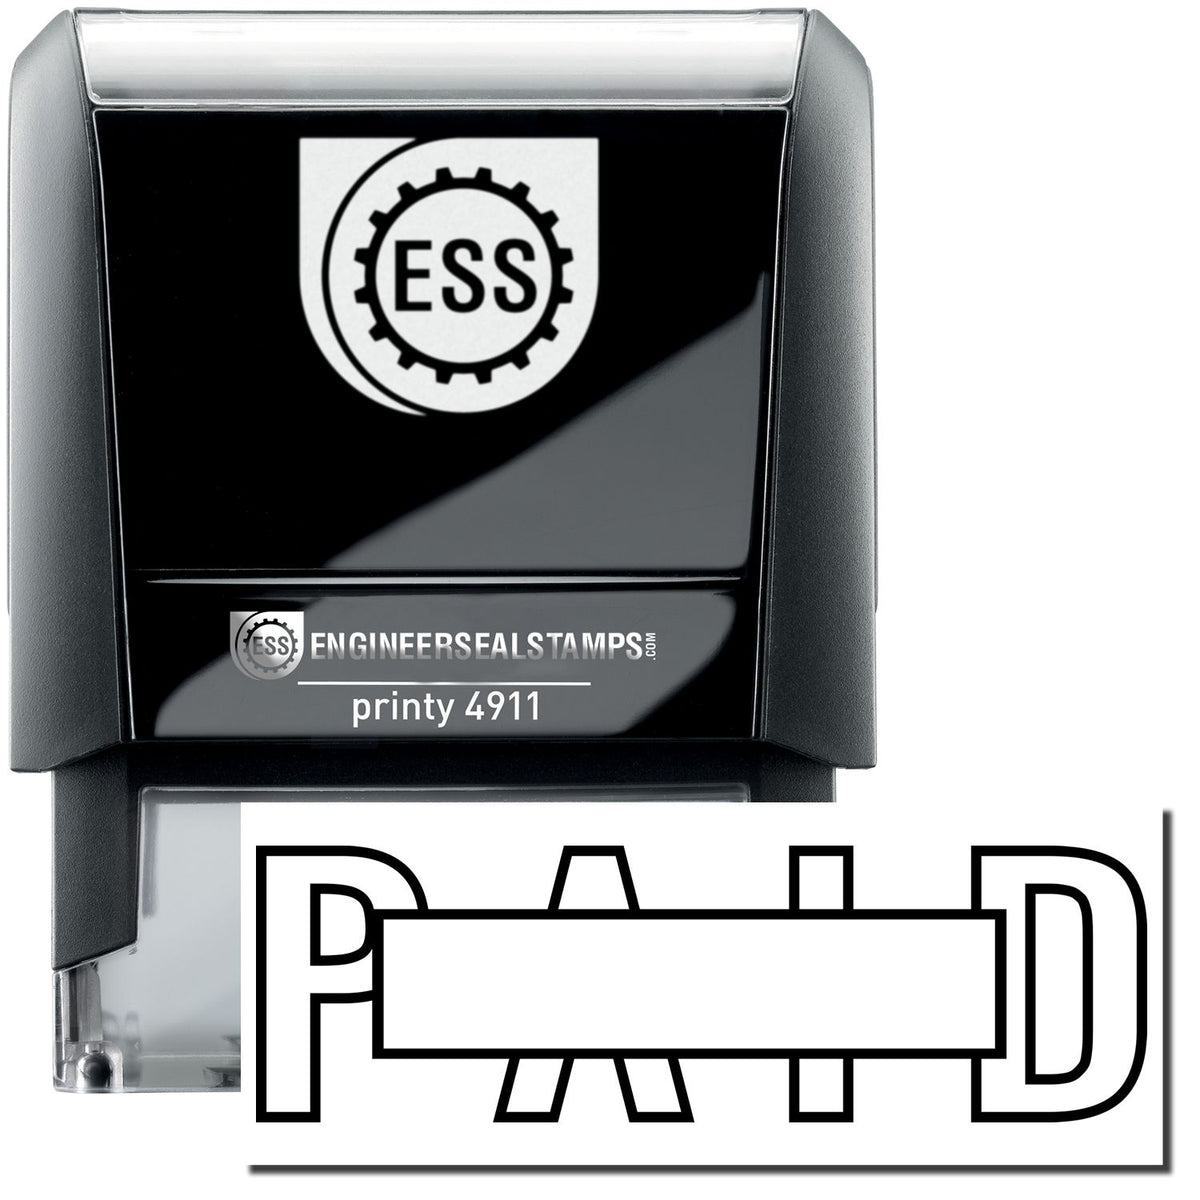 A self-inking stamp with a stamped image showing how the text &quot;PAID&quot; in an outline style with a box over the text&#39;s top is displayed after stamping.